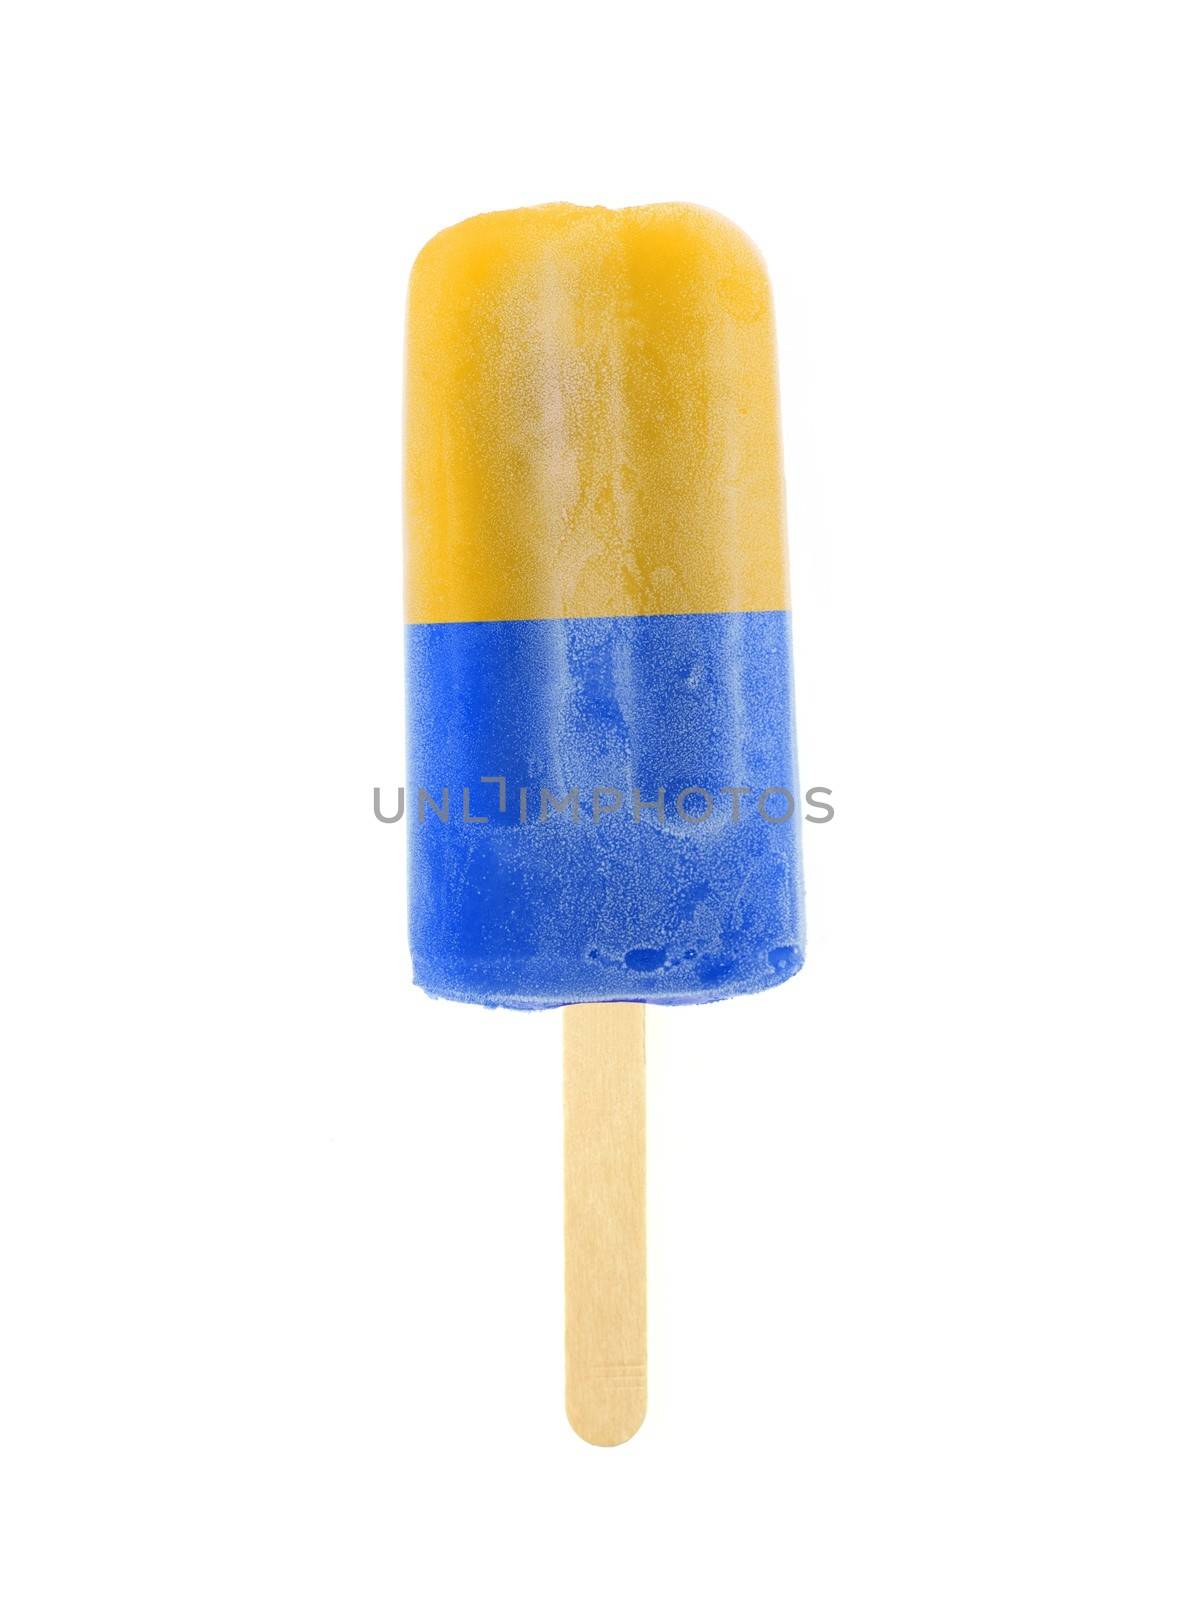 An icecream isolated against a white background